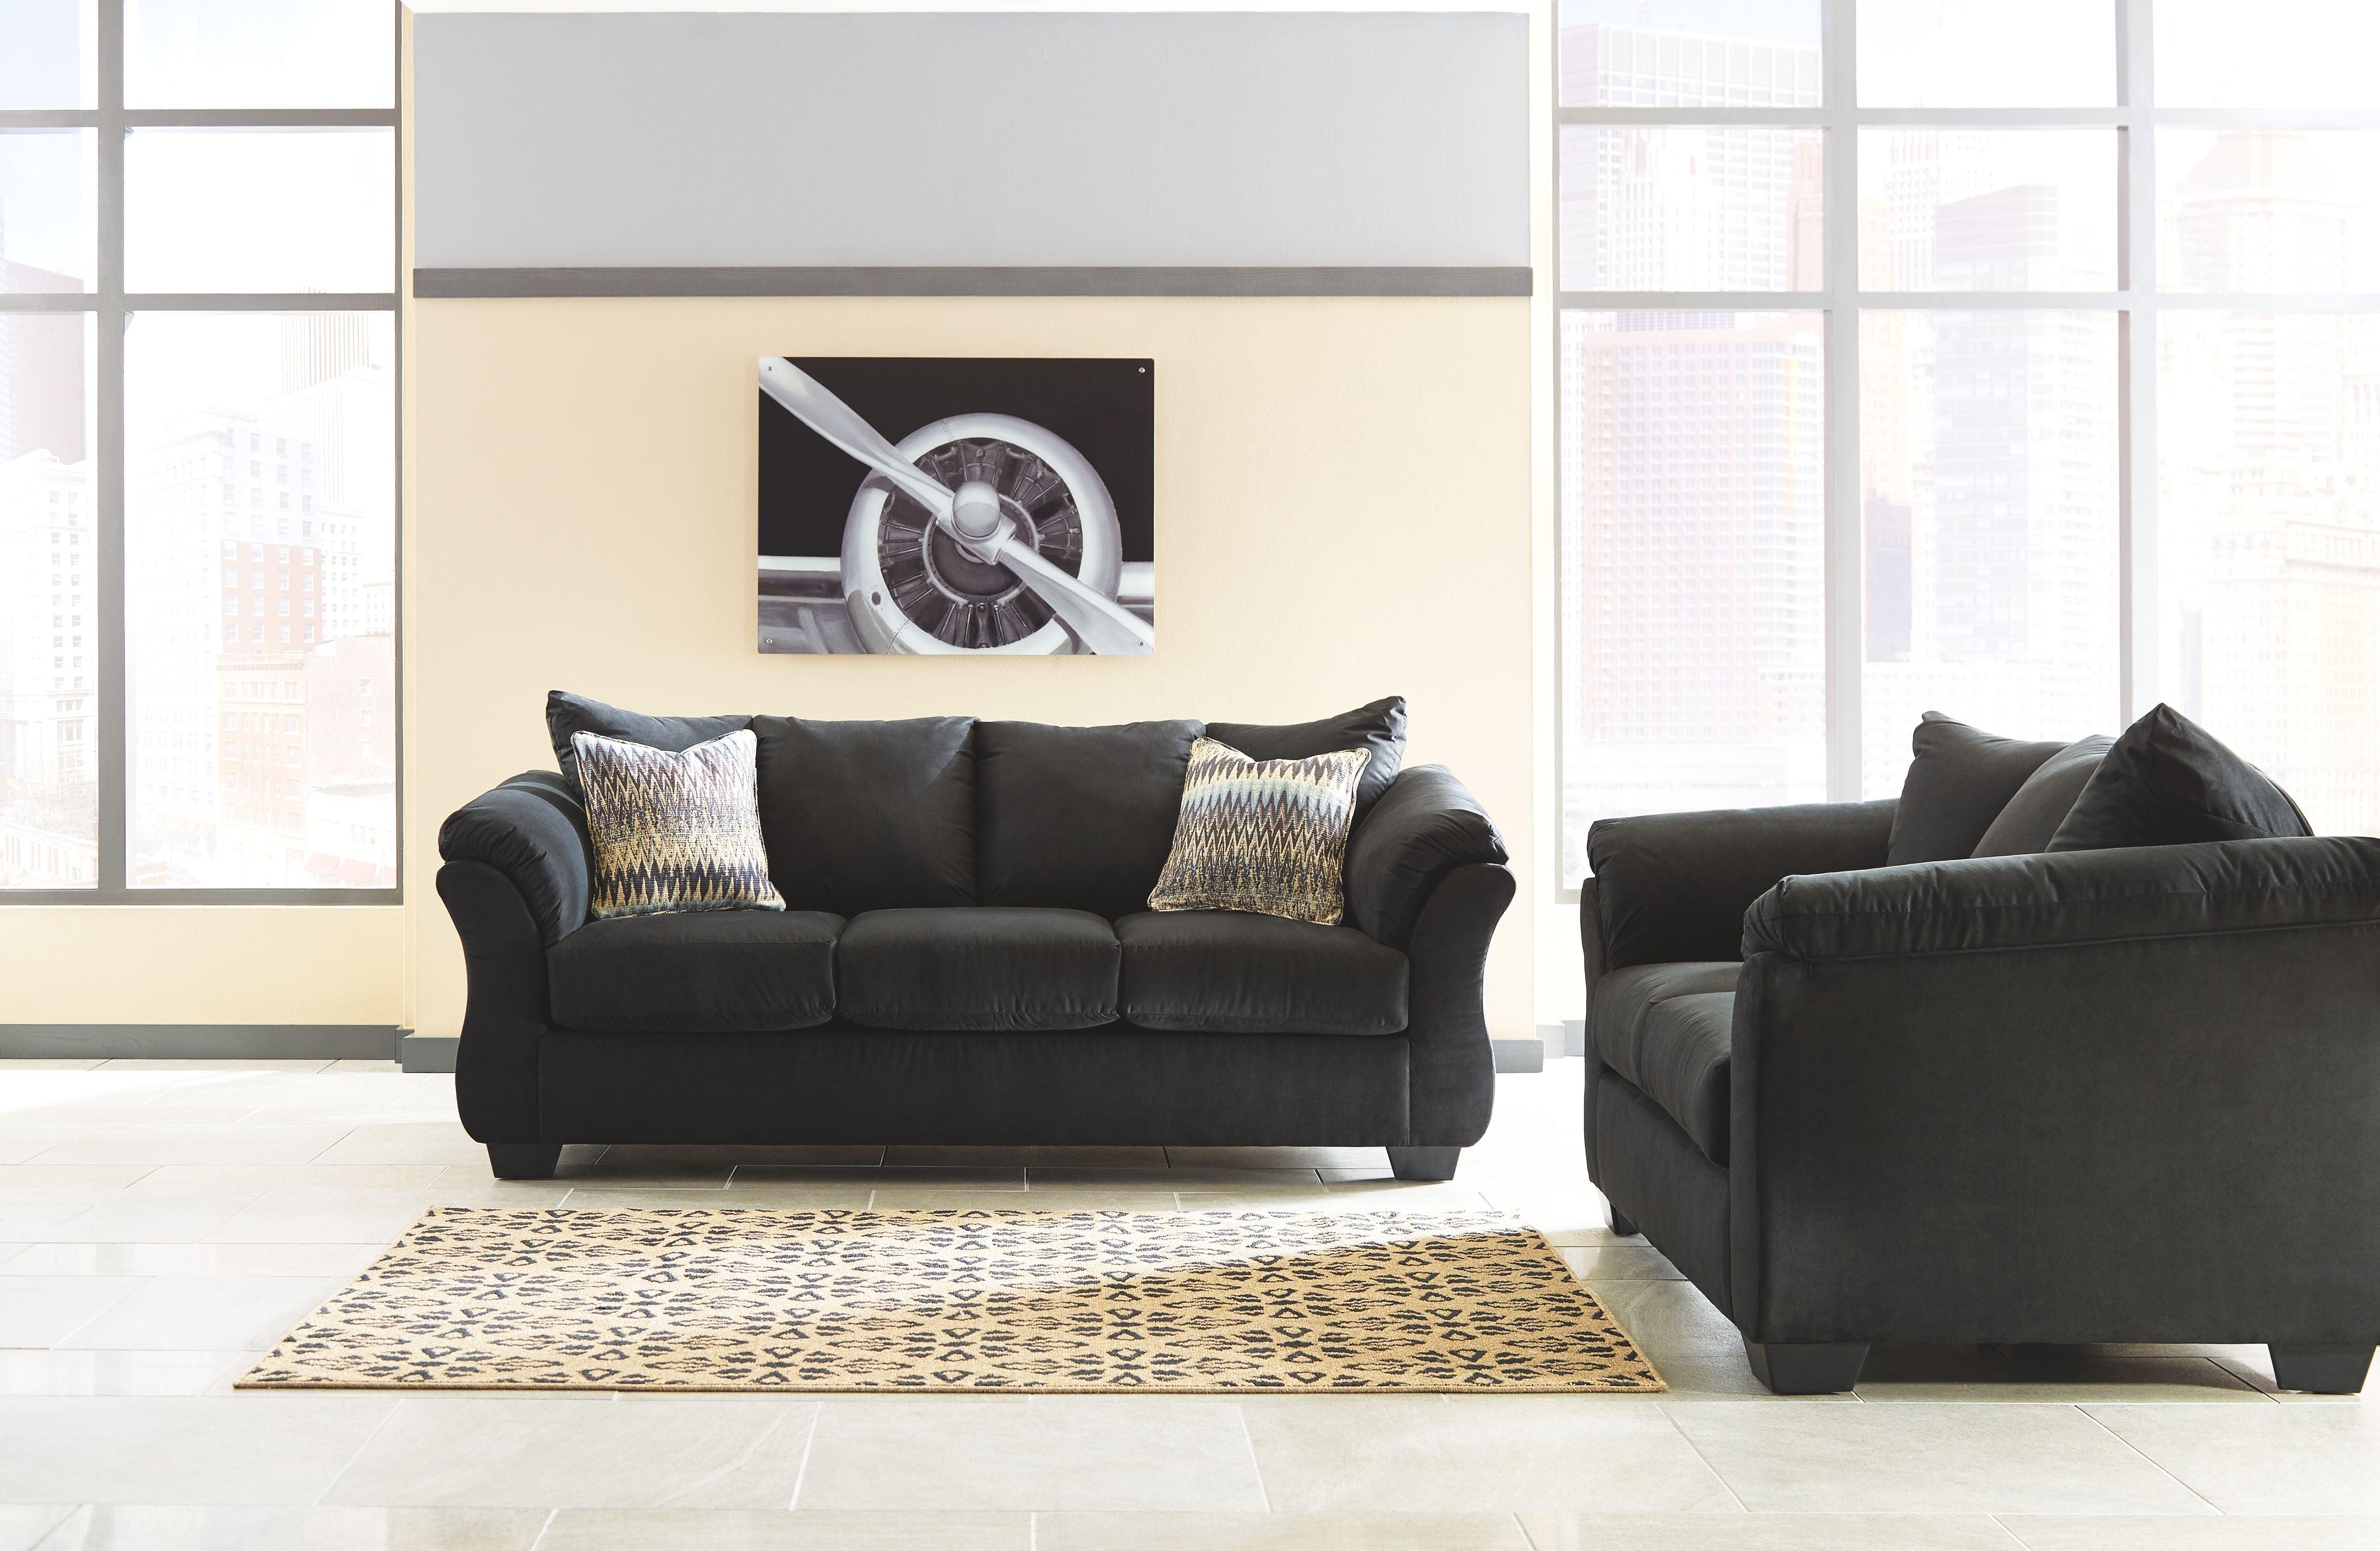 Ashley Furniture - Darcy - Stationary Loveseat - 5th Avenue Furniture